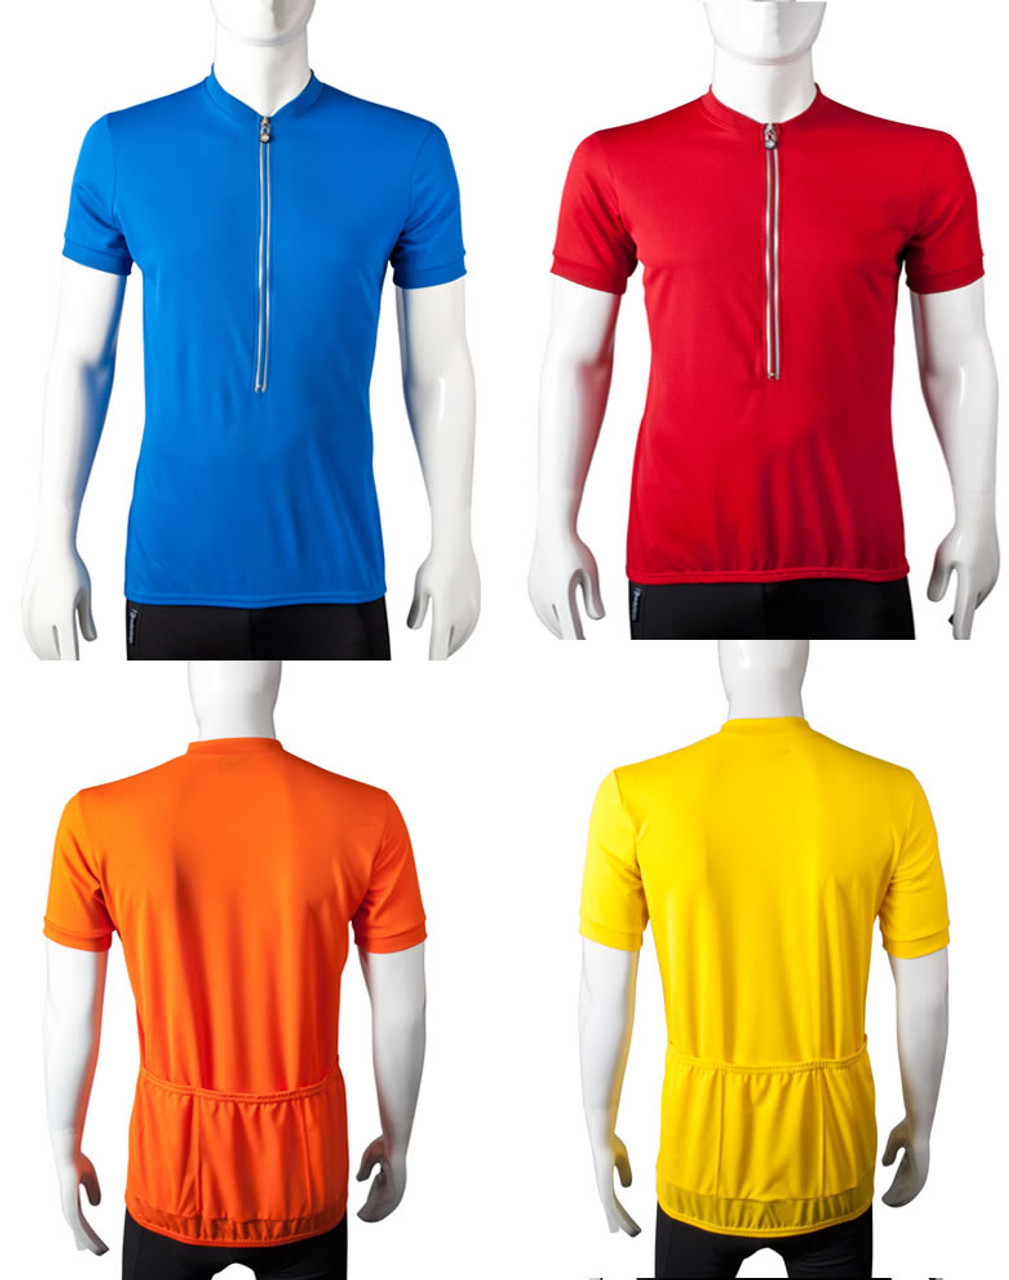 Tall Men's Bicycling Jersey with Extra 